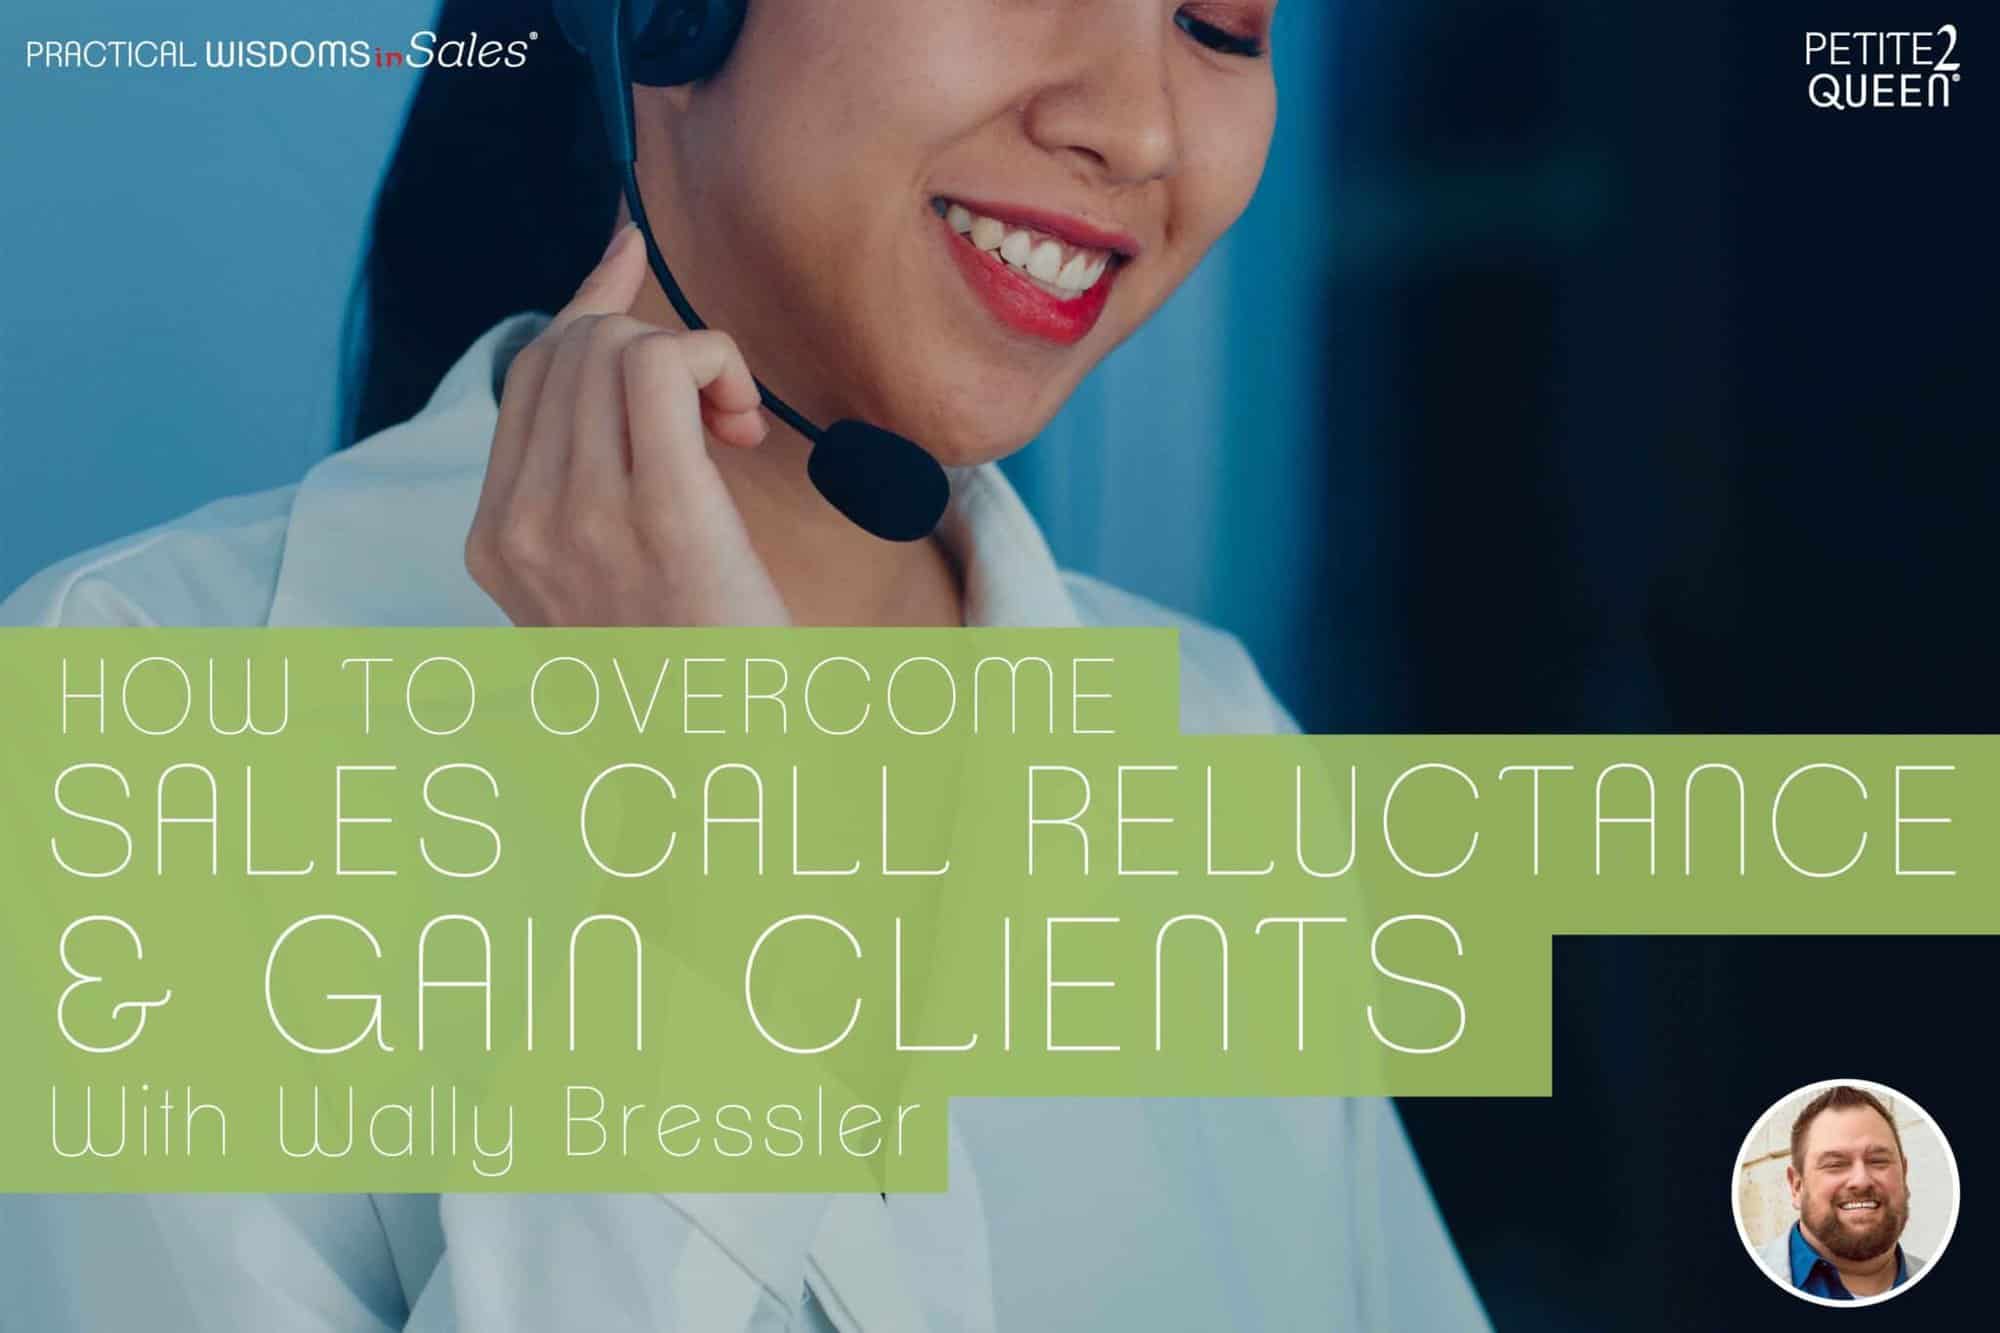 How to Overcome Sales Call Reluctance and Gain Clients - Wally Bressler